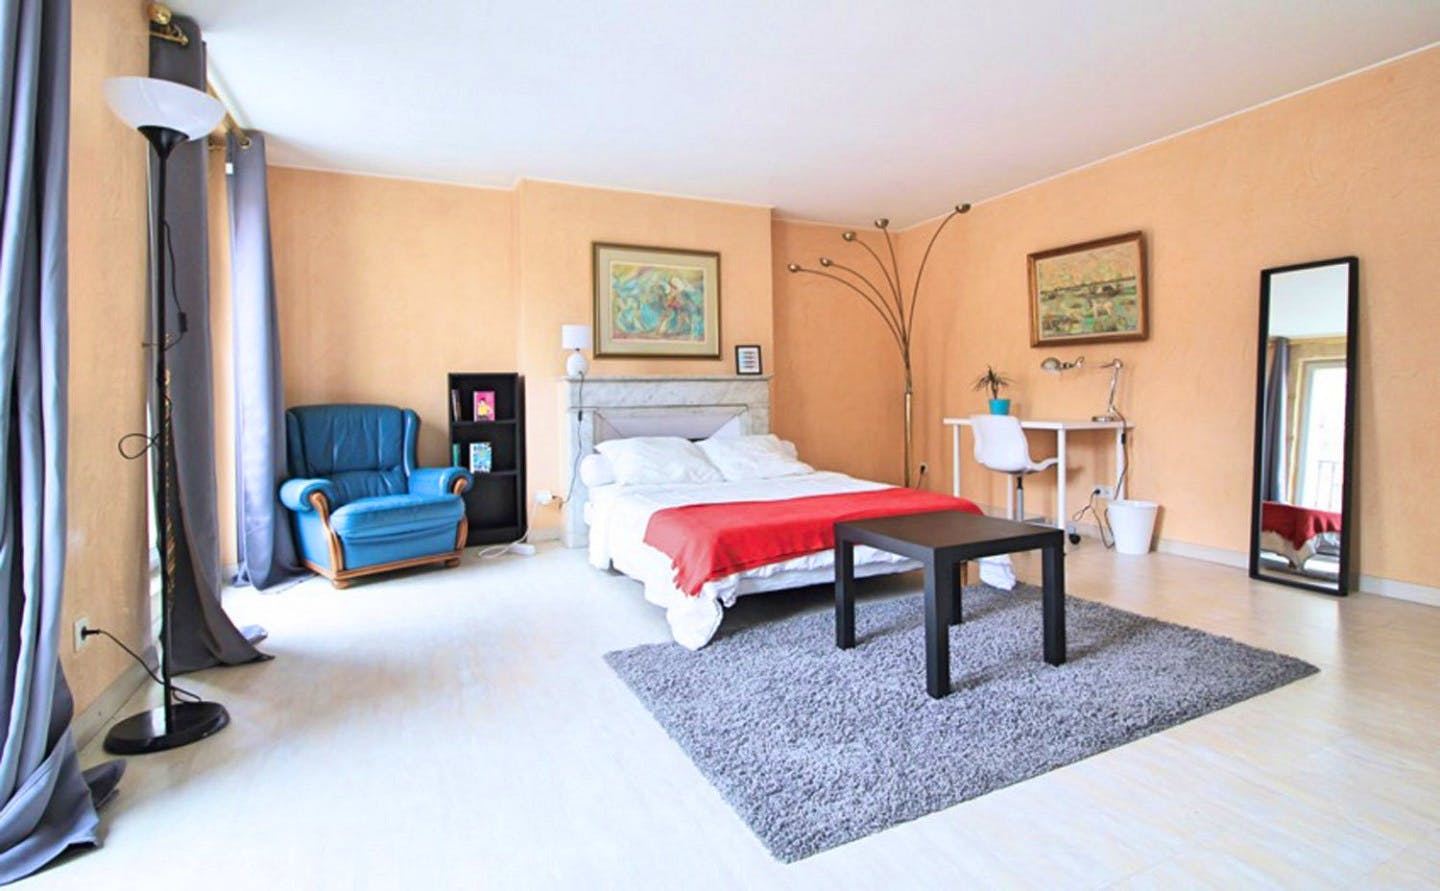 Large and spacious apartment located in the hyper-center of Marseille